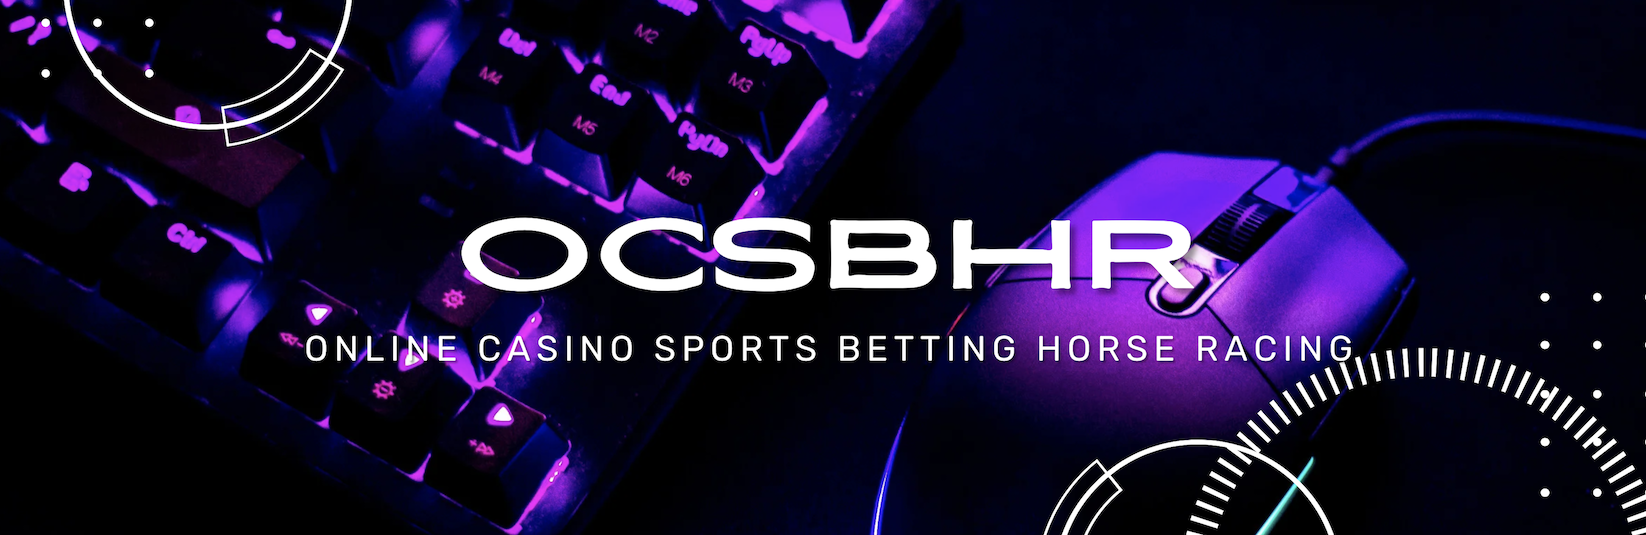 Online Casino Sports Betting Horse Racing bonuses and promotions